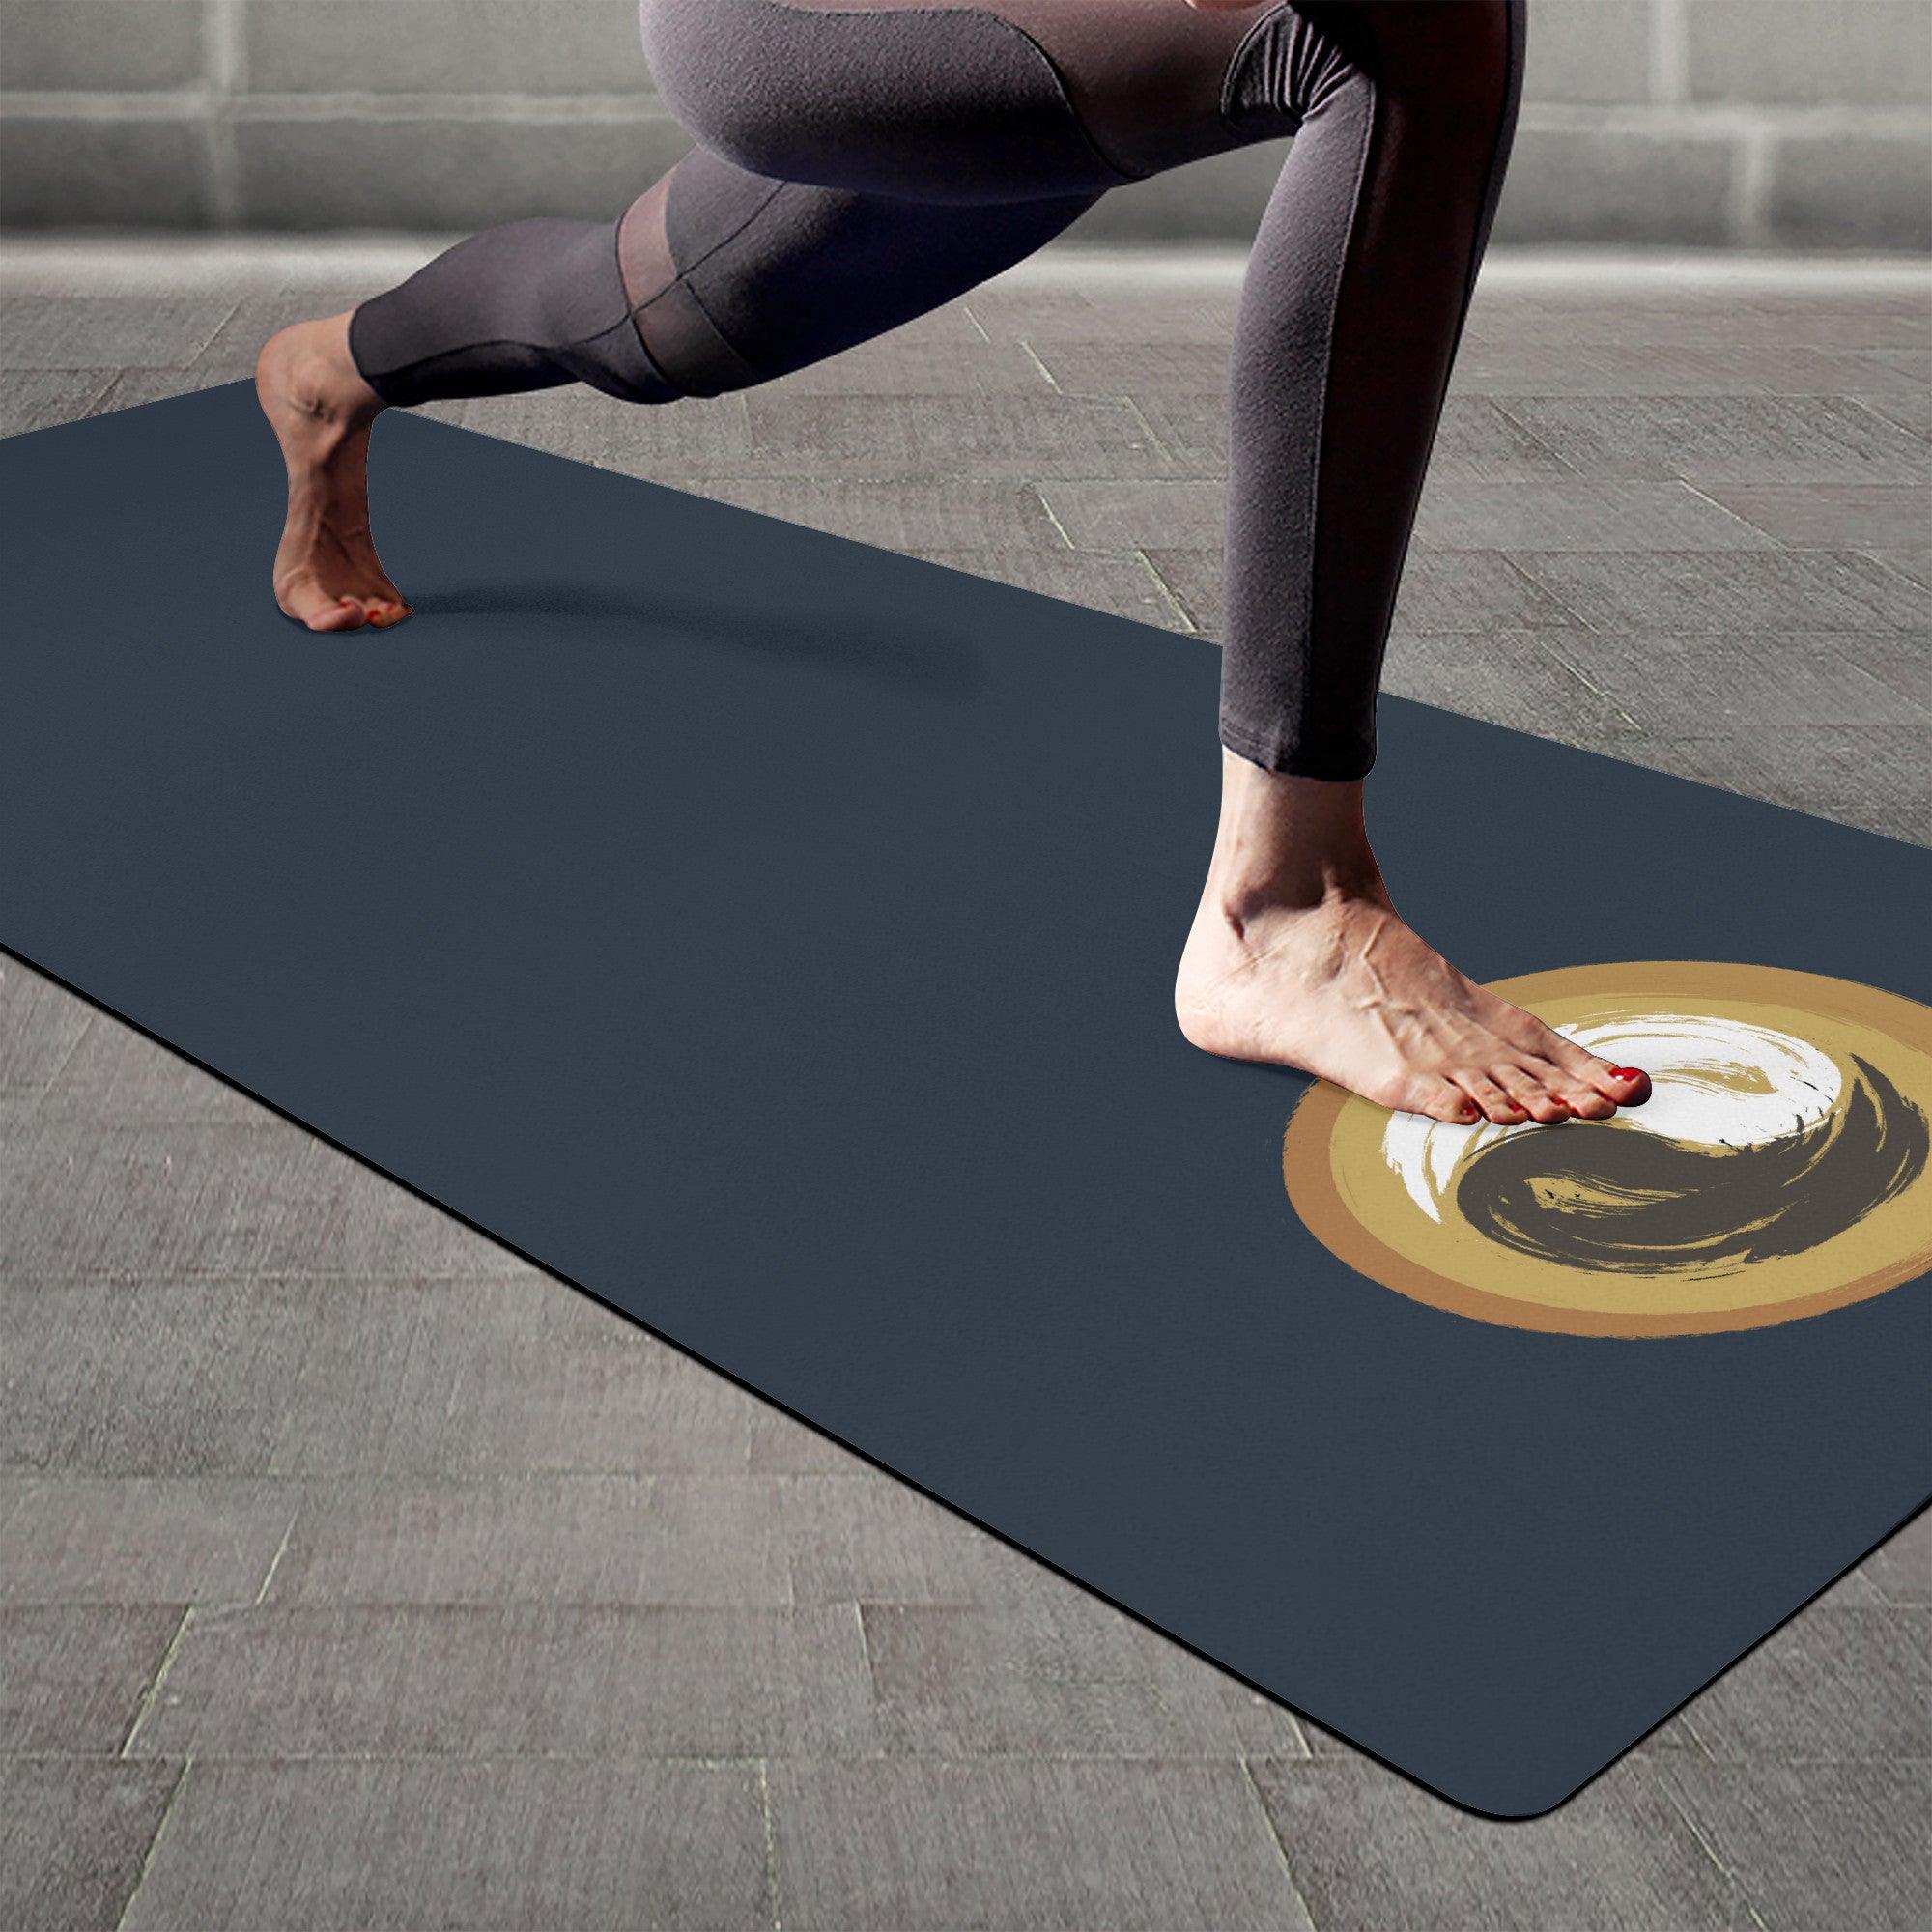 Rubber Yoga Mat - 3 mm fibers comfortable touch - Personal Hour Style